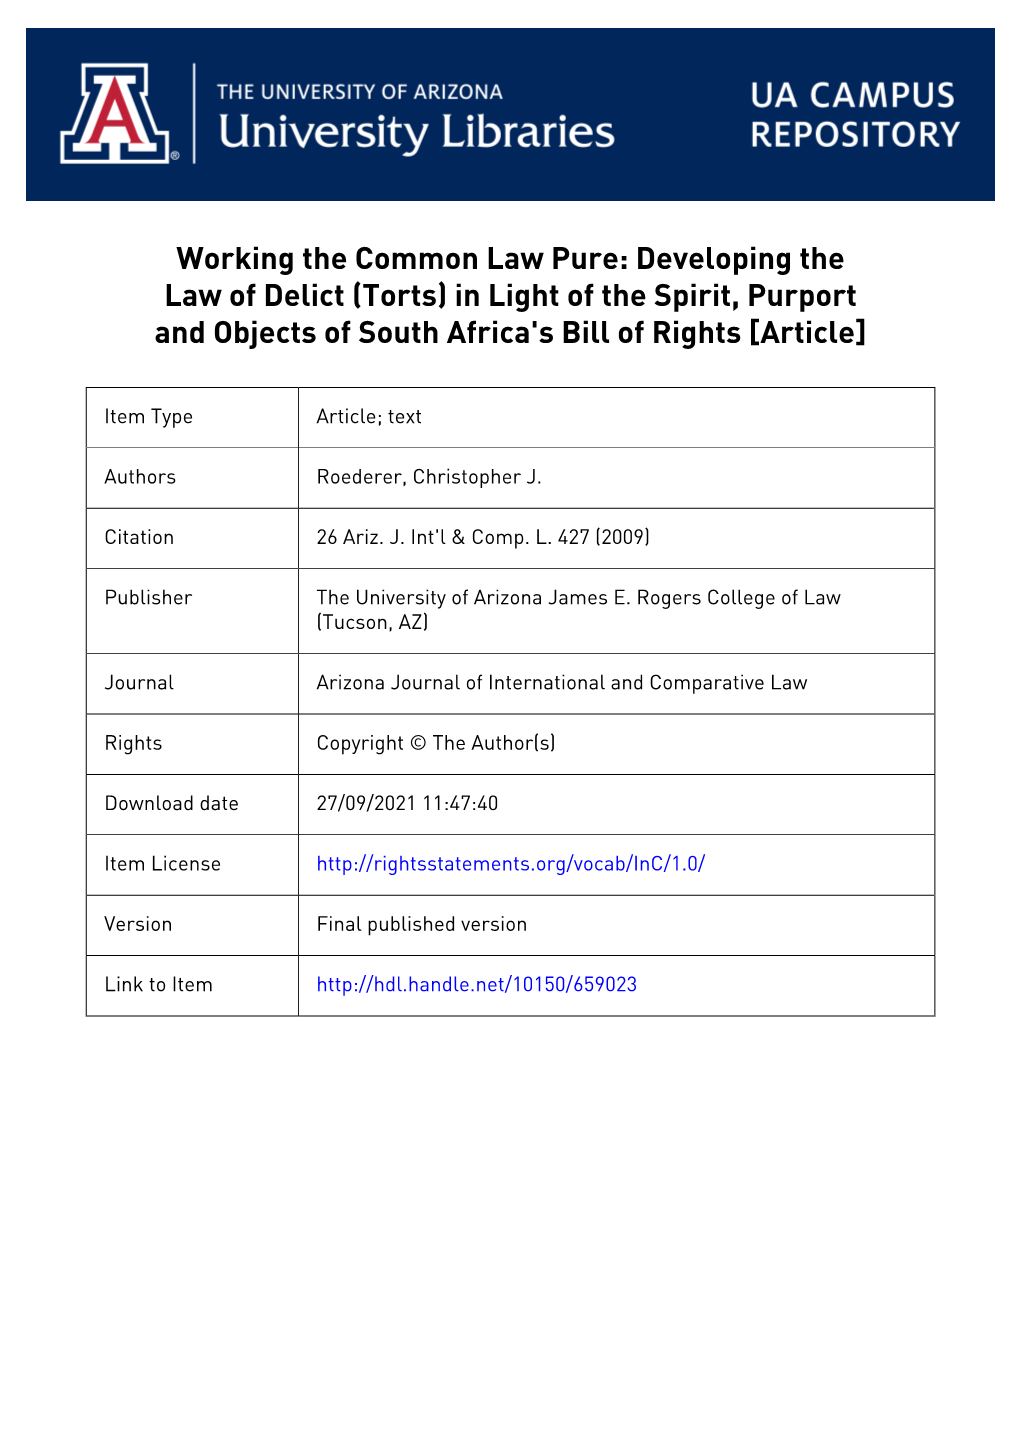 Working the Common Law Pure: Developing the Law of Delict (Torts) in Light of the Spirit, Purport and Objects of South Africa's Bill of Rights [Article]